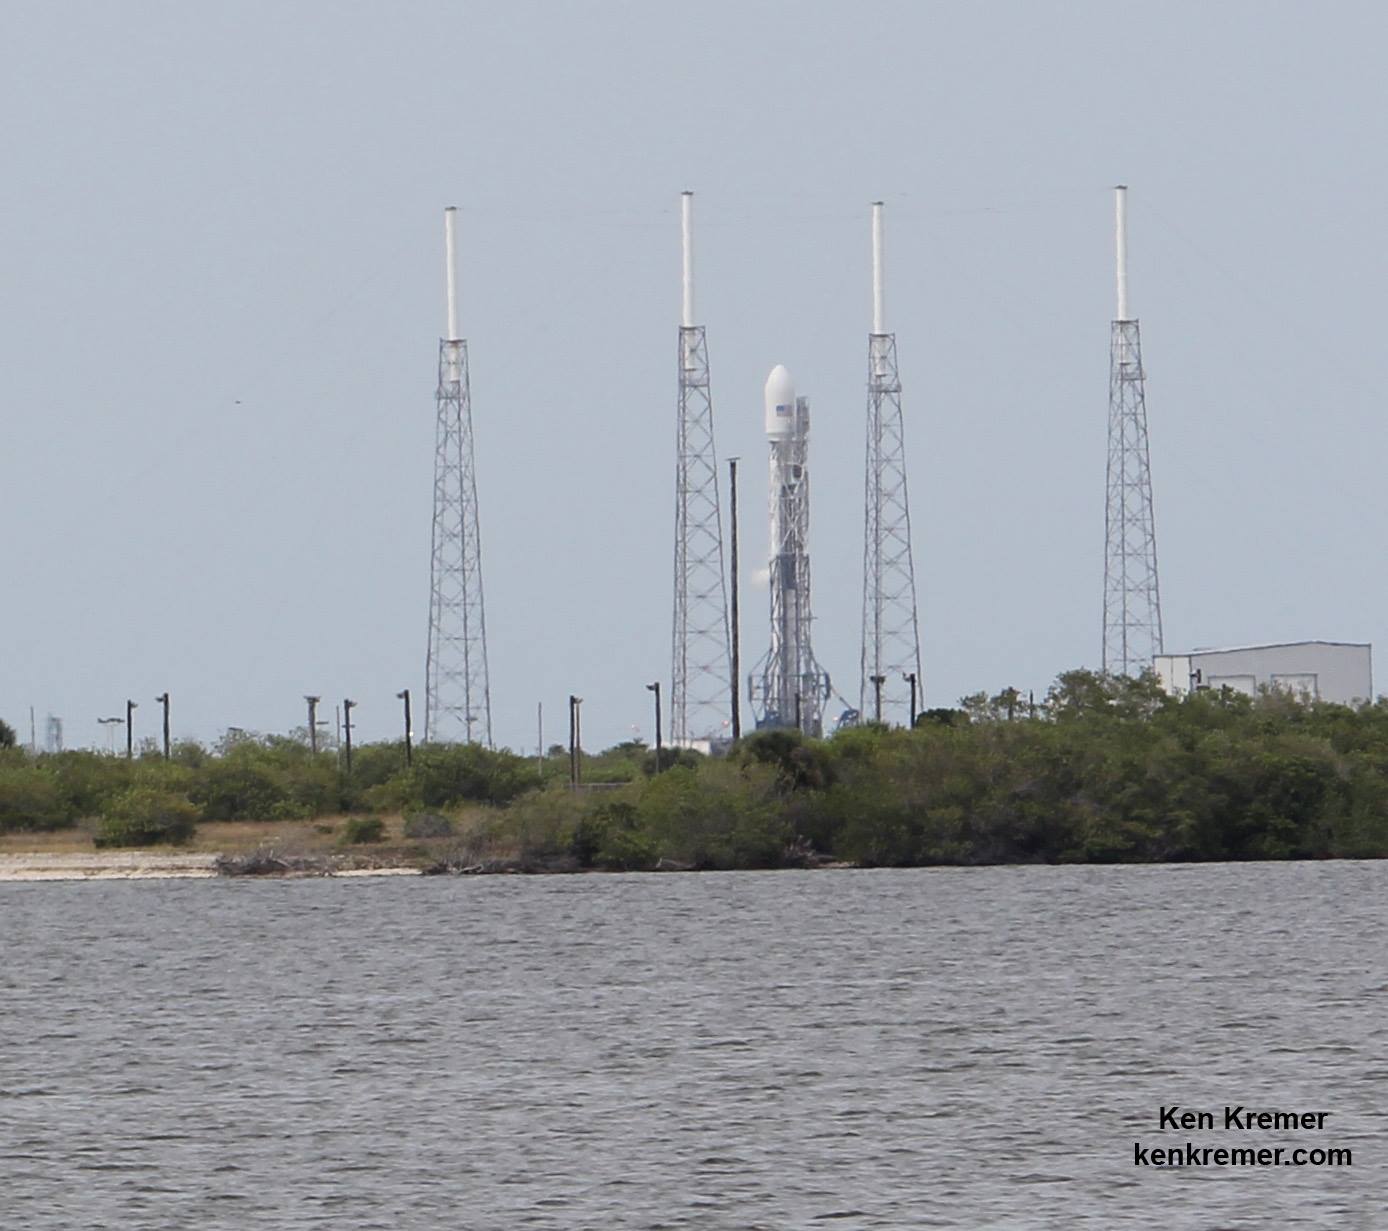 SpaceX's Falcon 9 v1.1 must wait a little longer to deliver Orbcomm's first six OG-2 satellites into orbit. Photo Credit: Ken Kremer